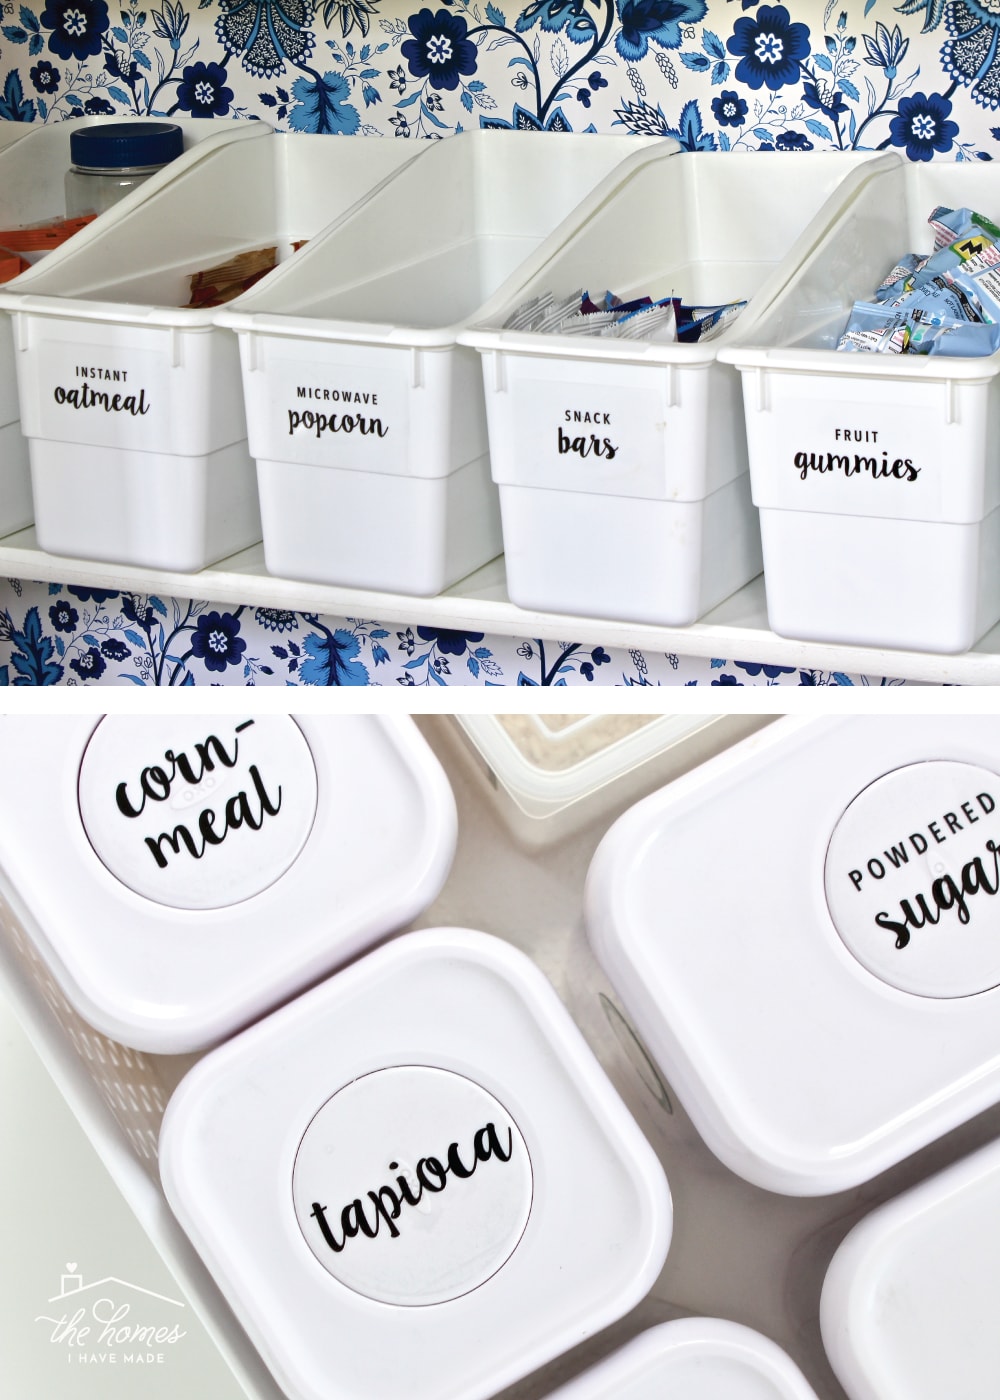 Ready to organize all the things? Check out these 70+ creative ways to label baskets, bins, boxes & more!